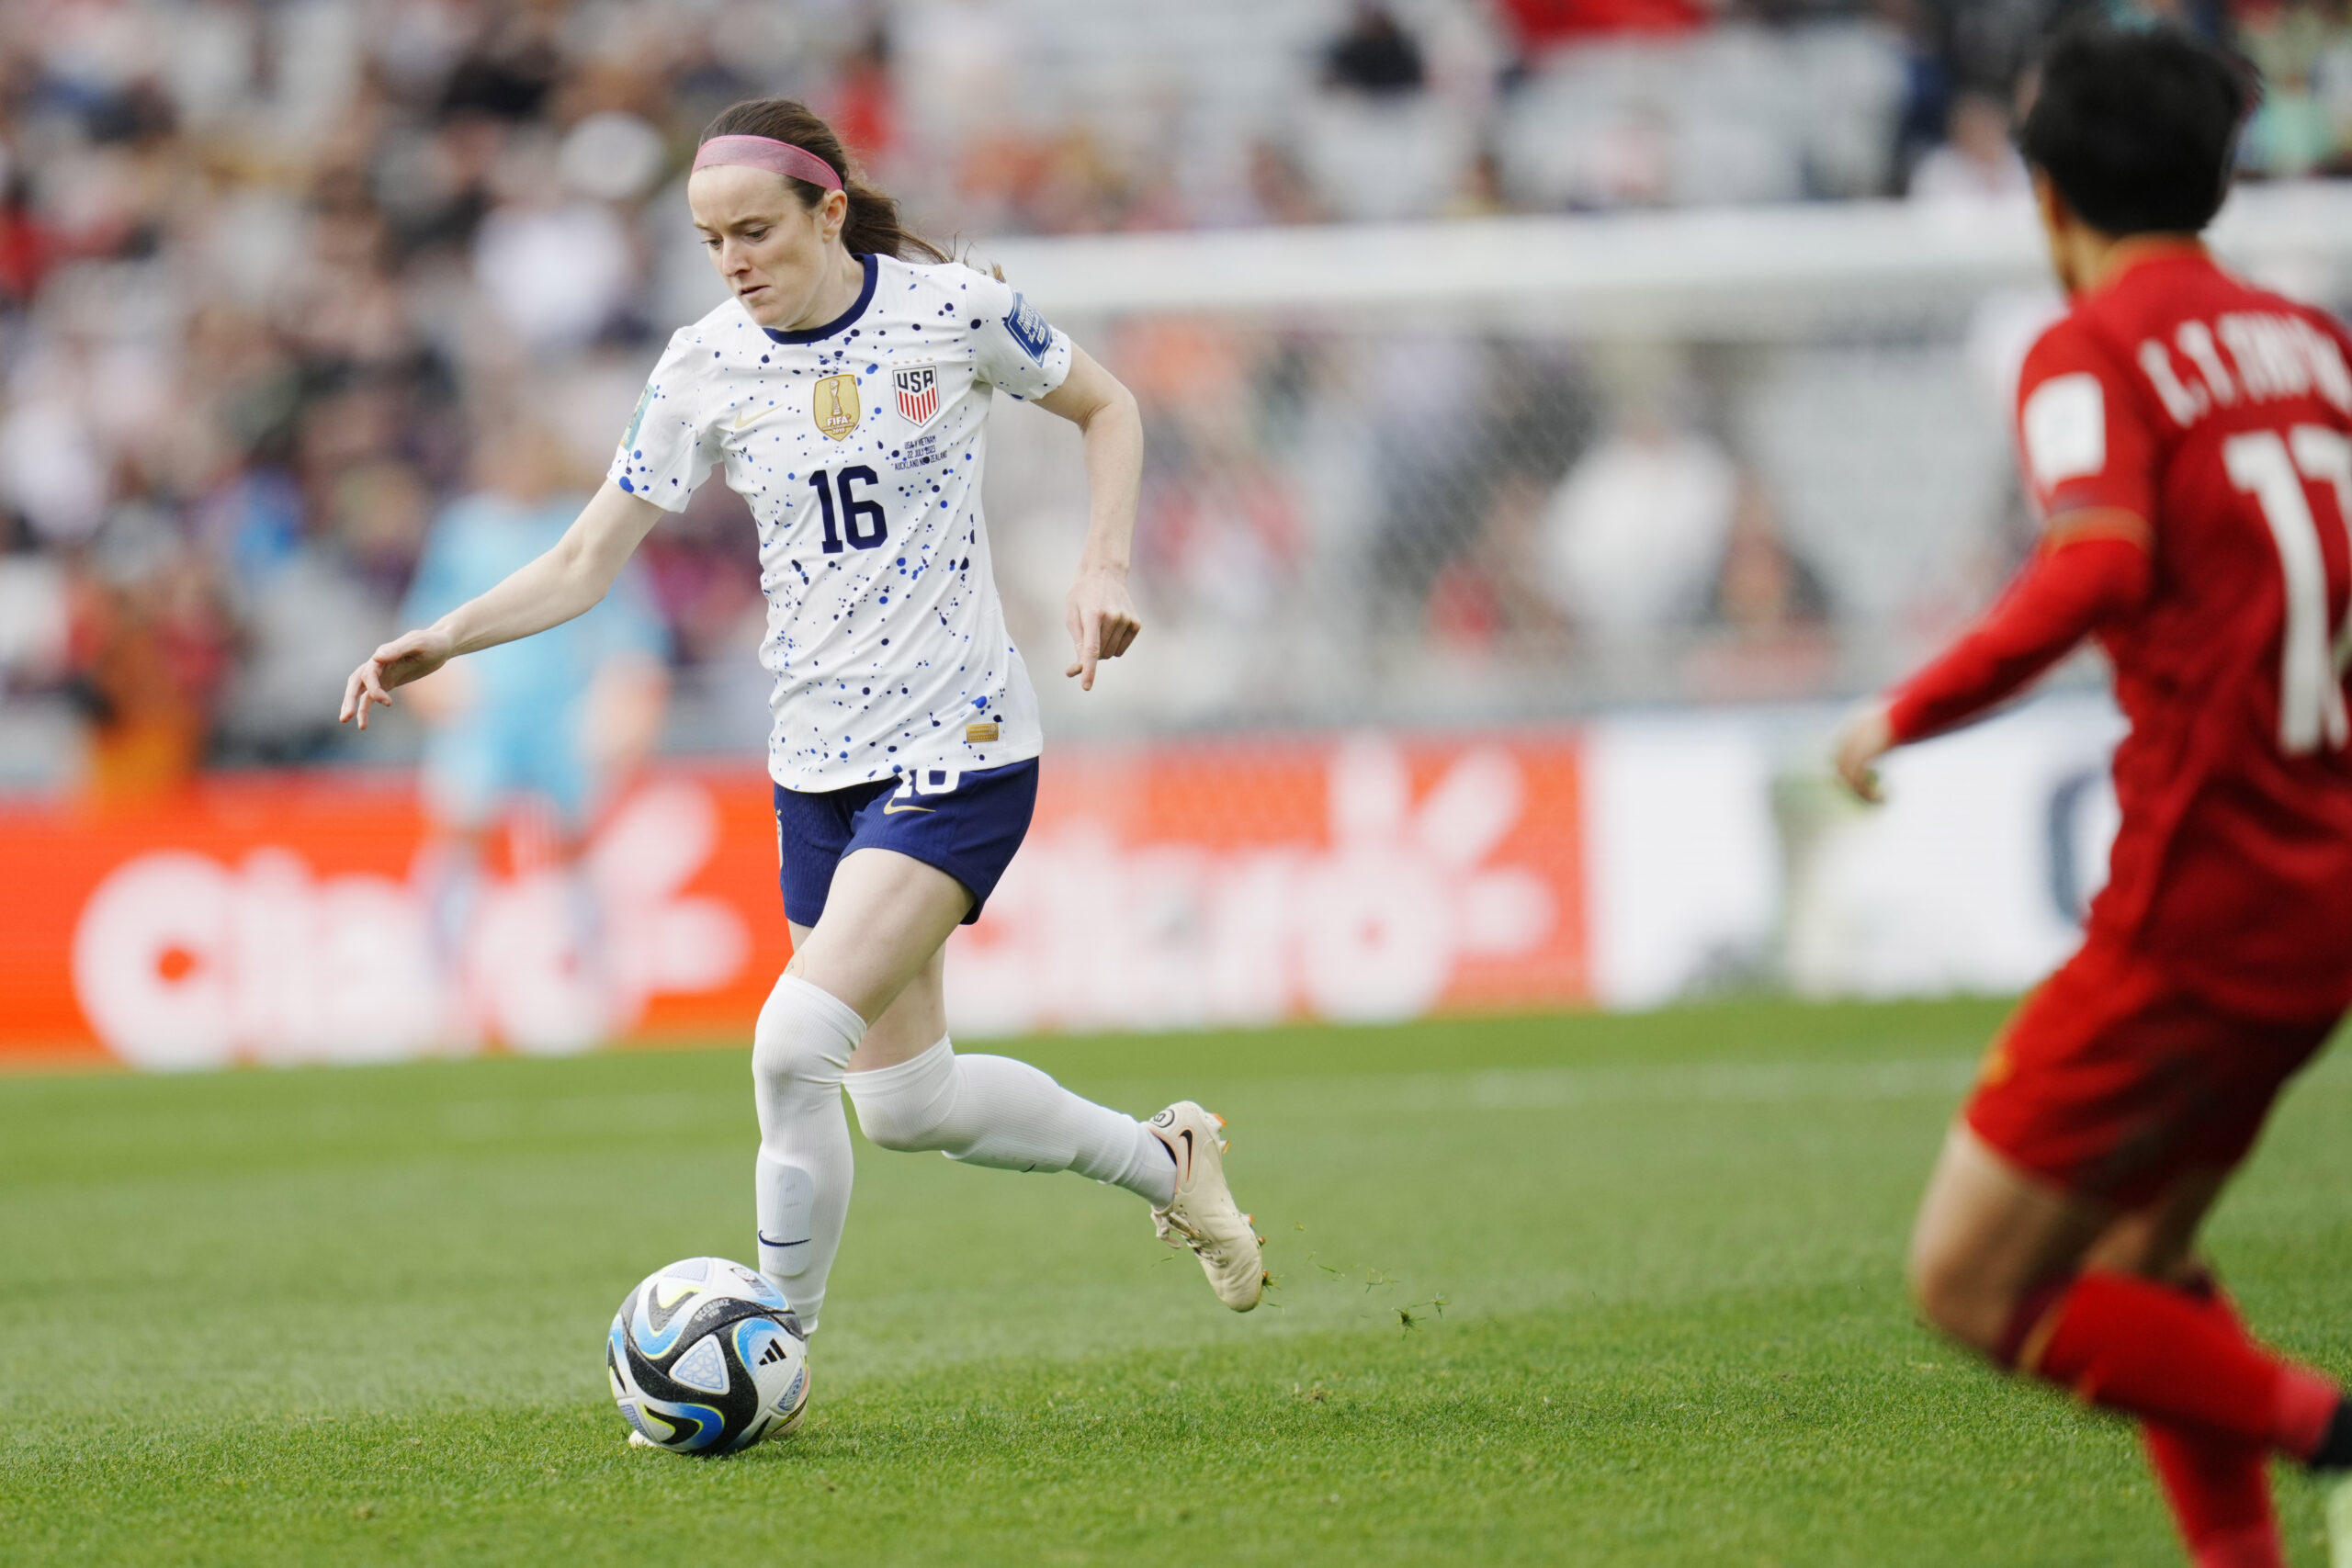 Rose Lavelle dribbles a ball down the pitch. A defender hovers to her right.